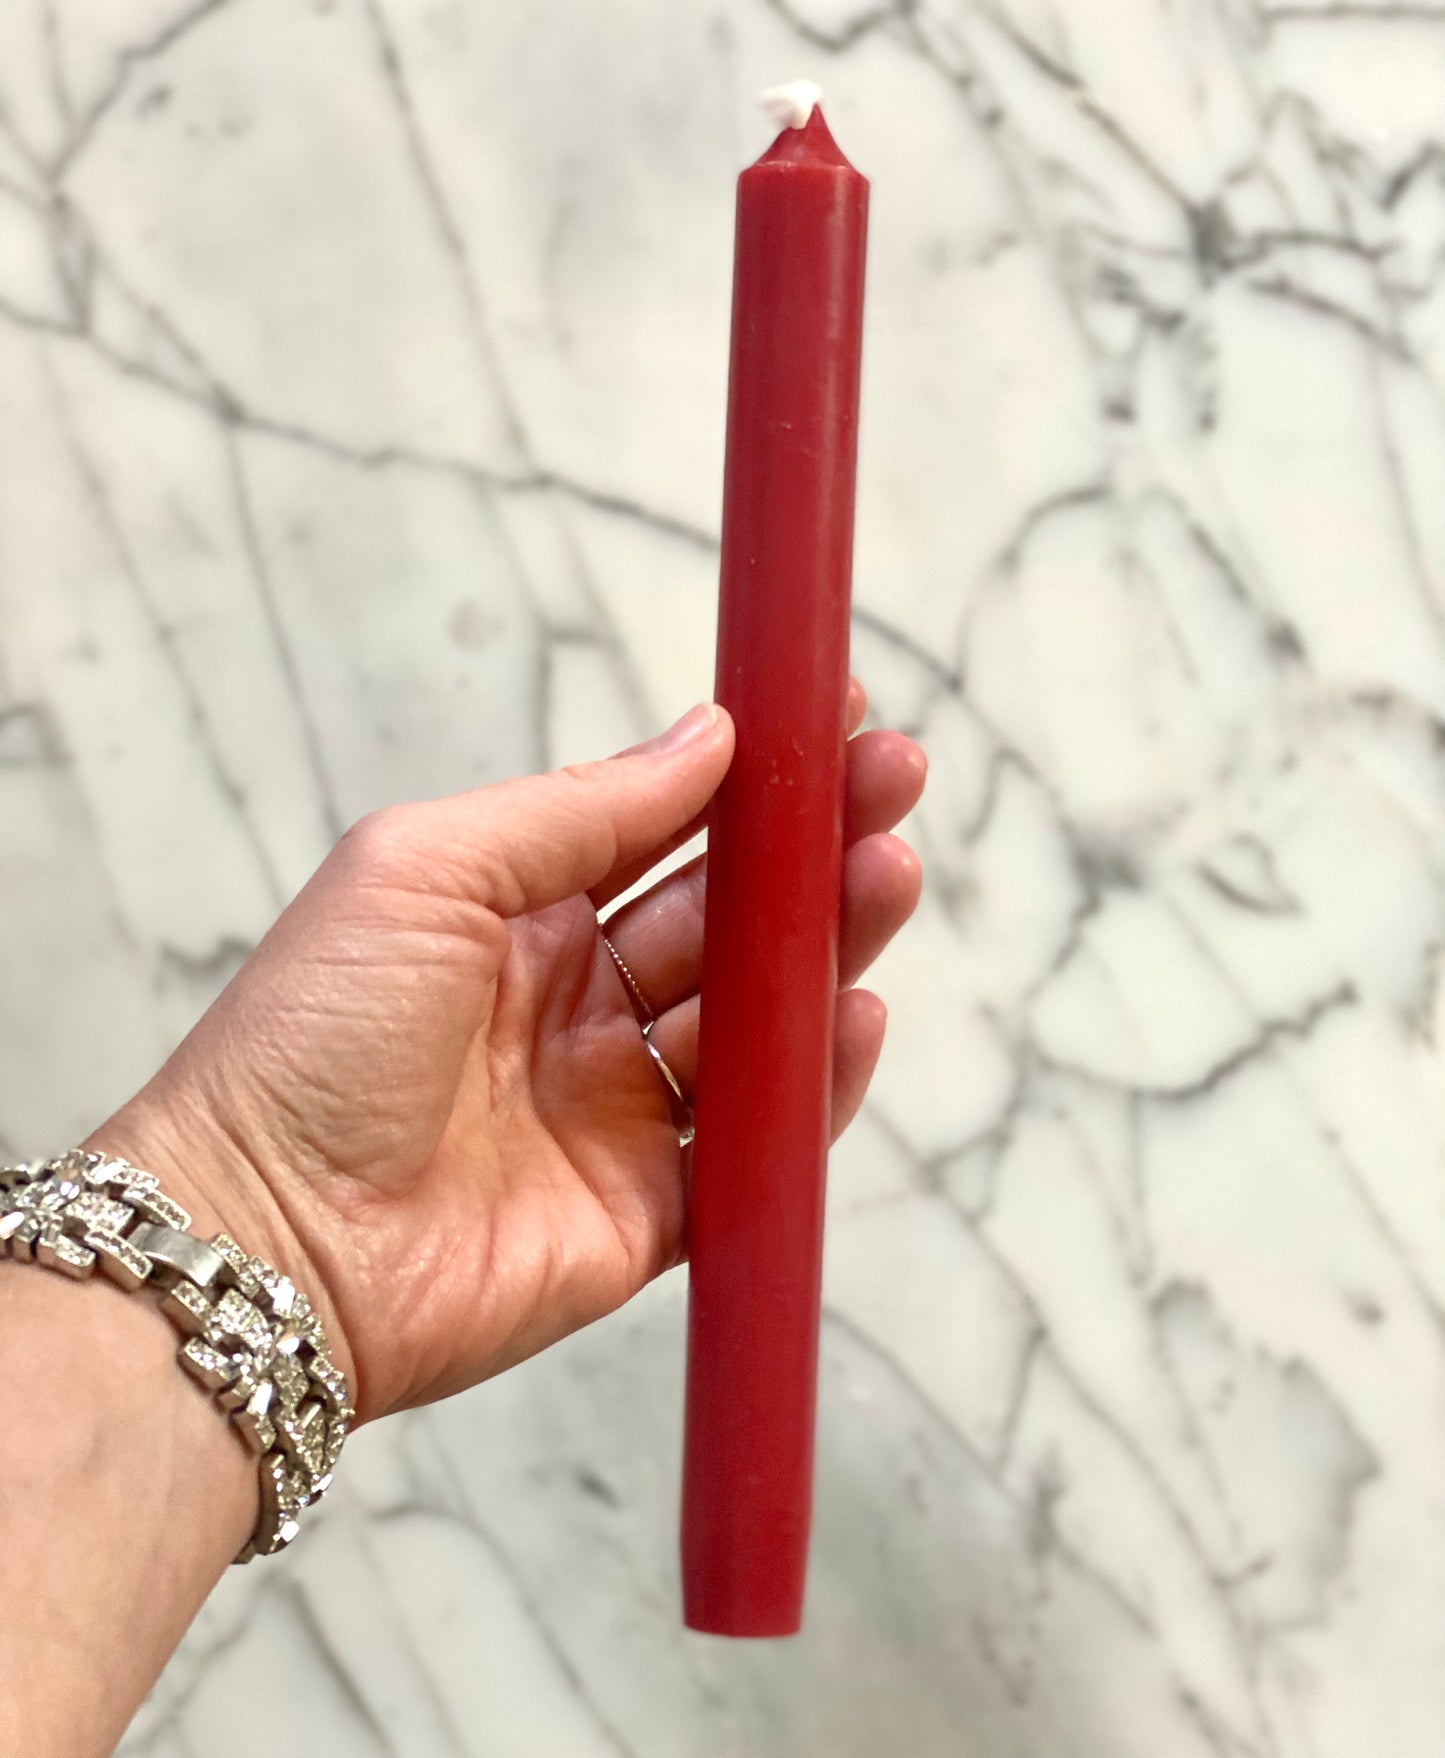 Straight Taper 12" Candles in Red - 2 Candles Per Package